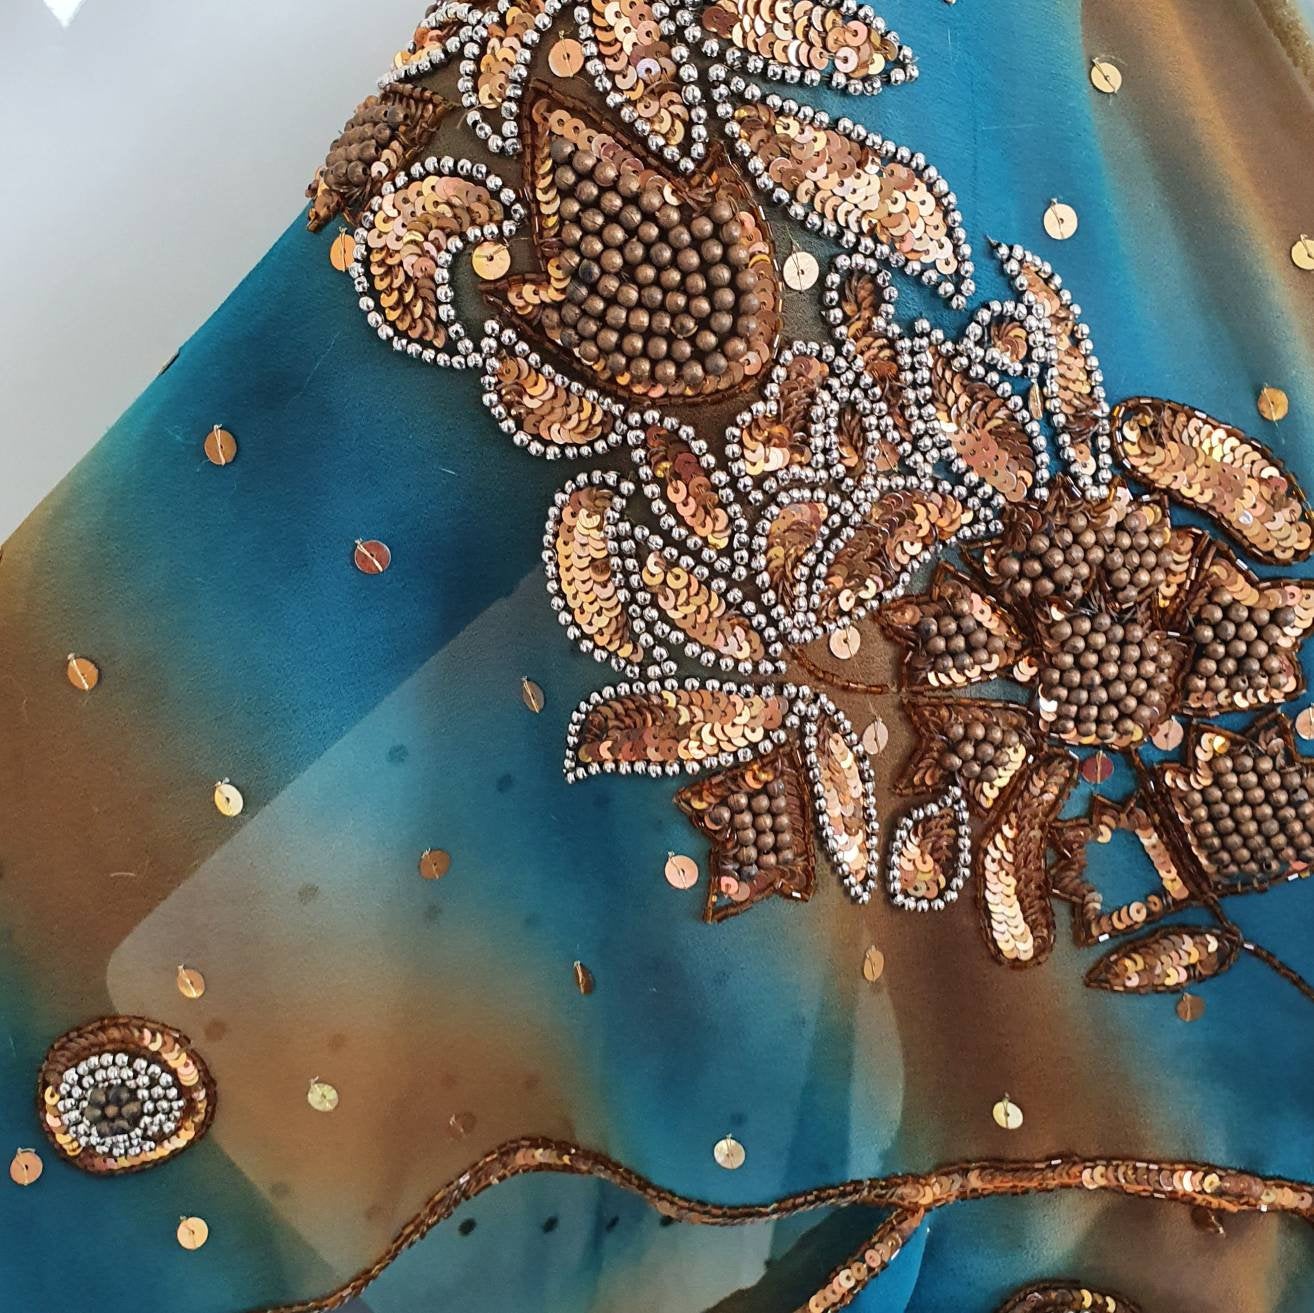 Draped kimono in teal and brown with elaborated hand embroidery with bronze sequins and beads (M-L)